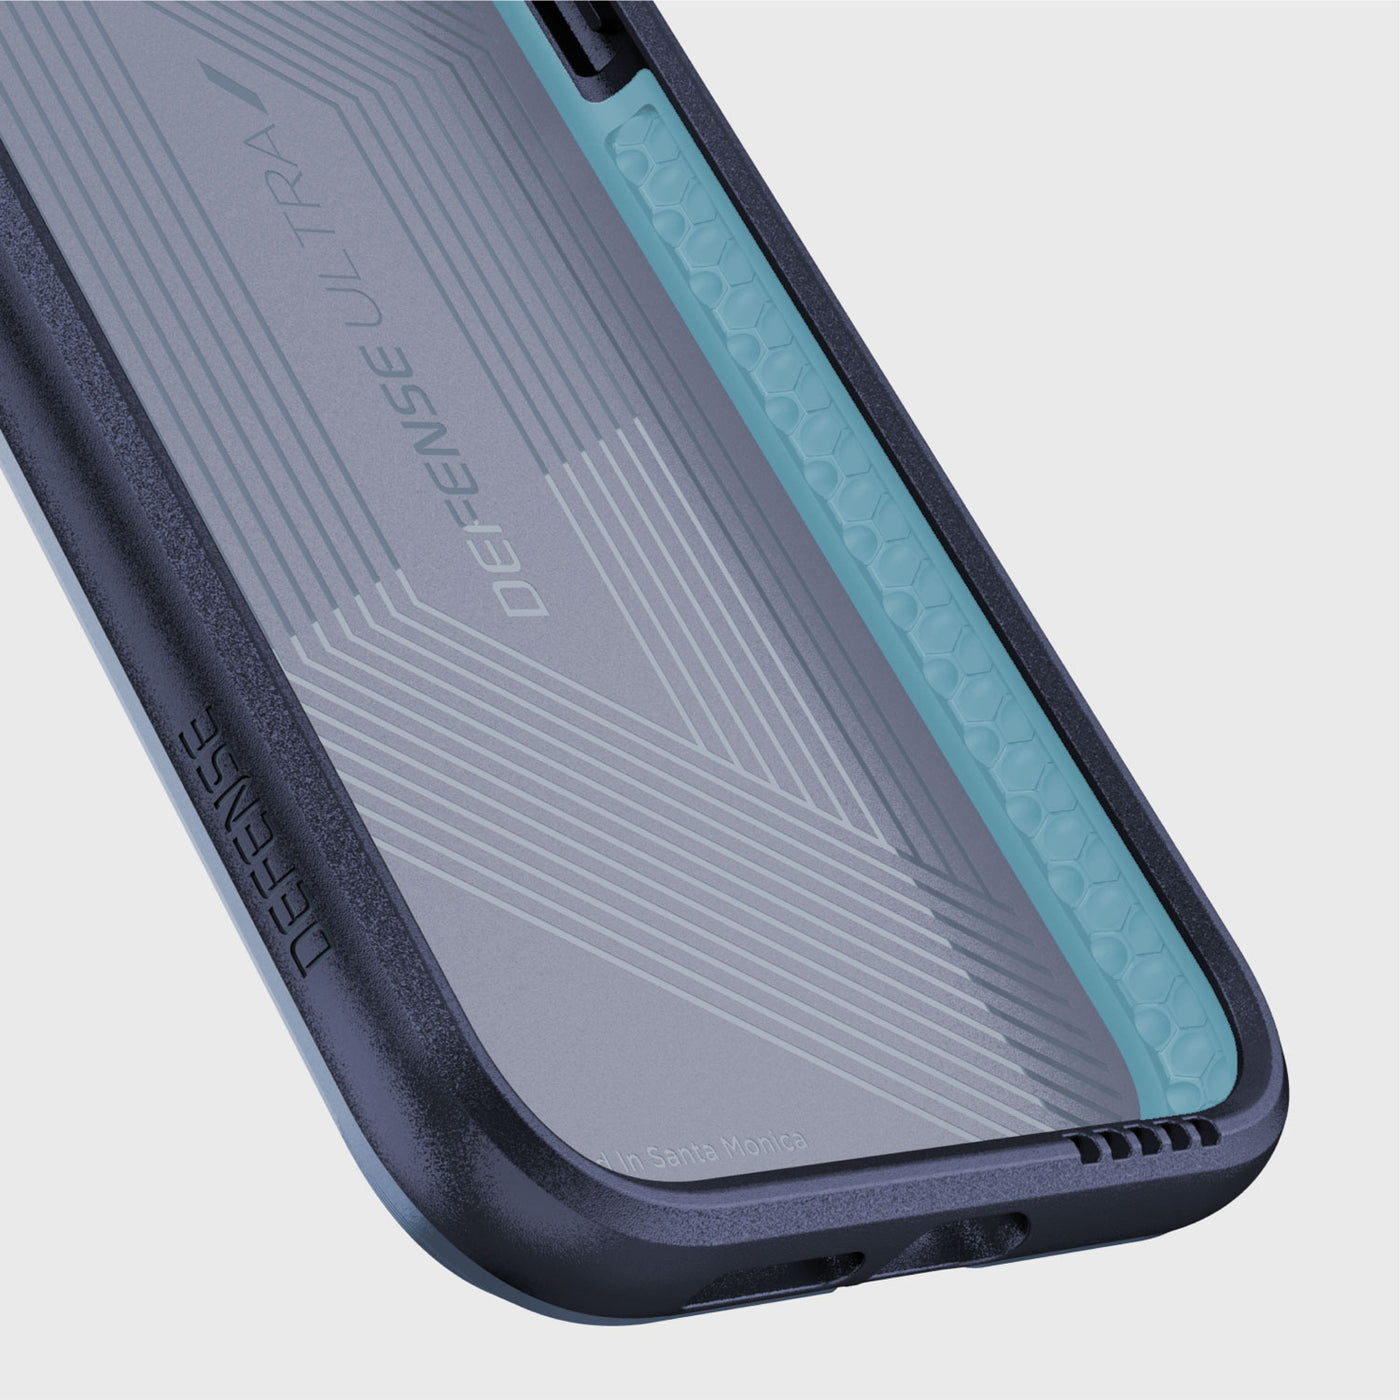 Luxurious Case for iPhone XR. Raptic Ultra in blue.